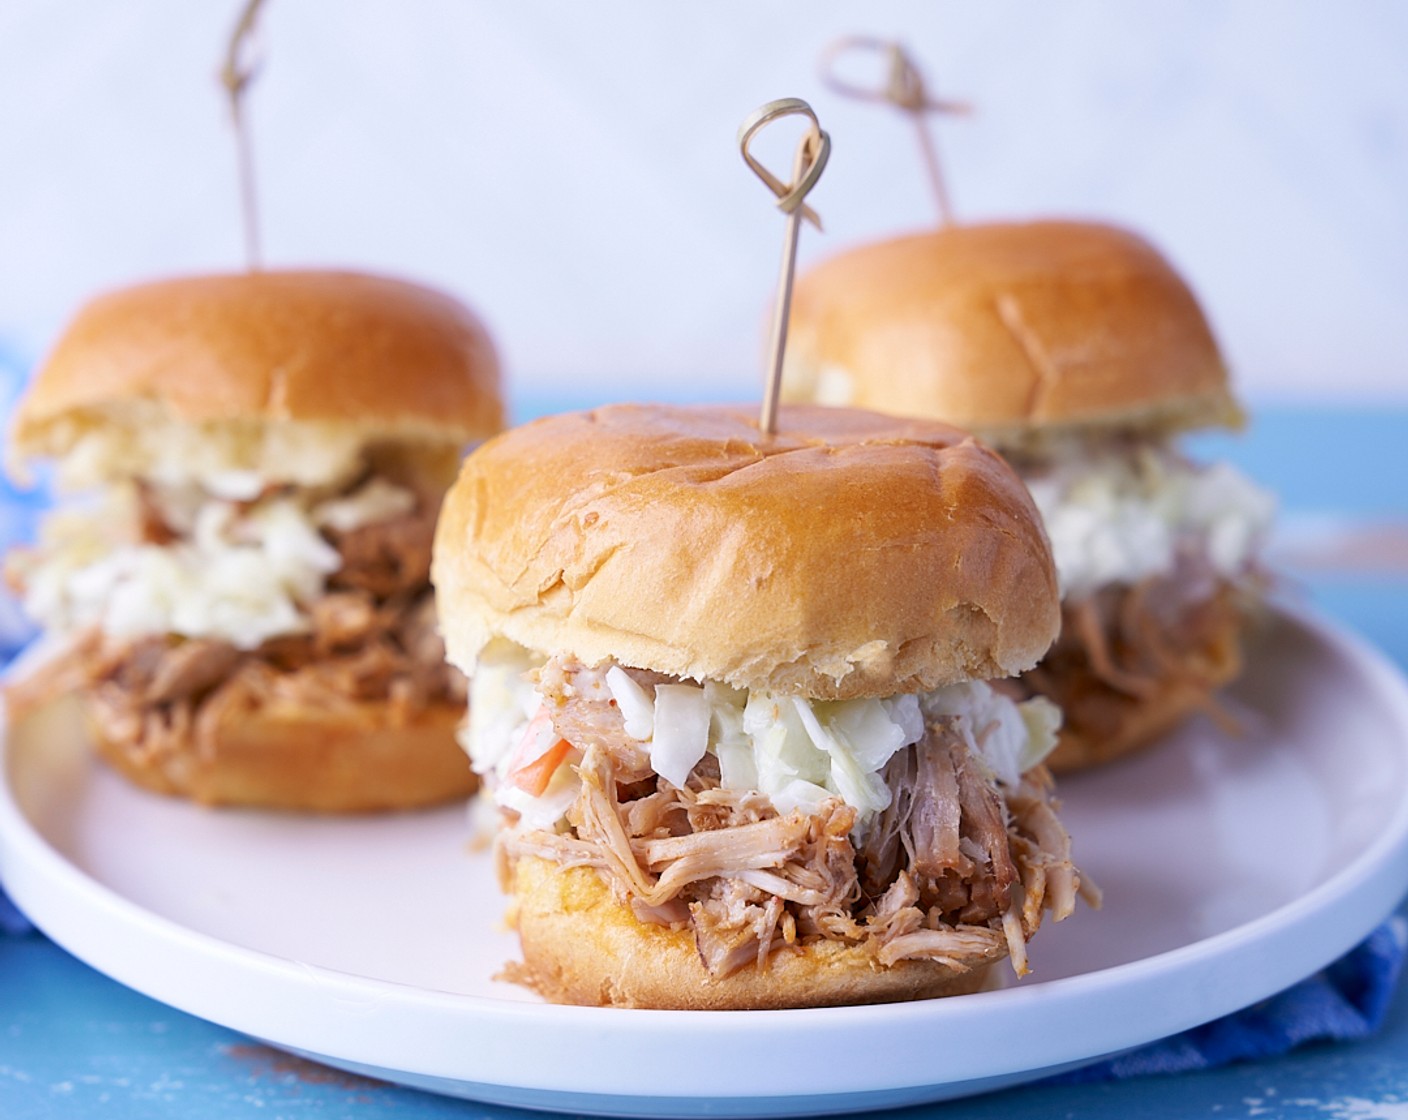 step 6 Use the tongs the serve the pulled pork onto the Slider Buns (4) and top with Coleslaw Mix (2 cups). Enjoy!